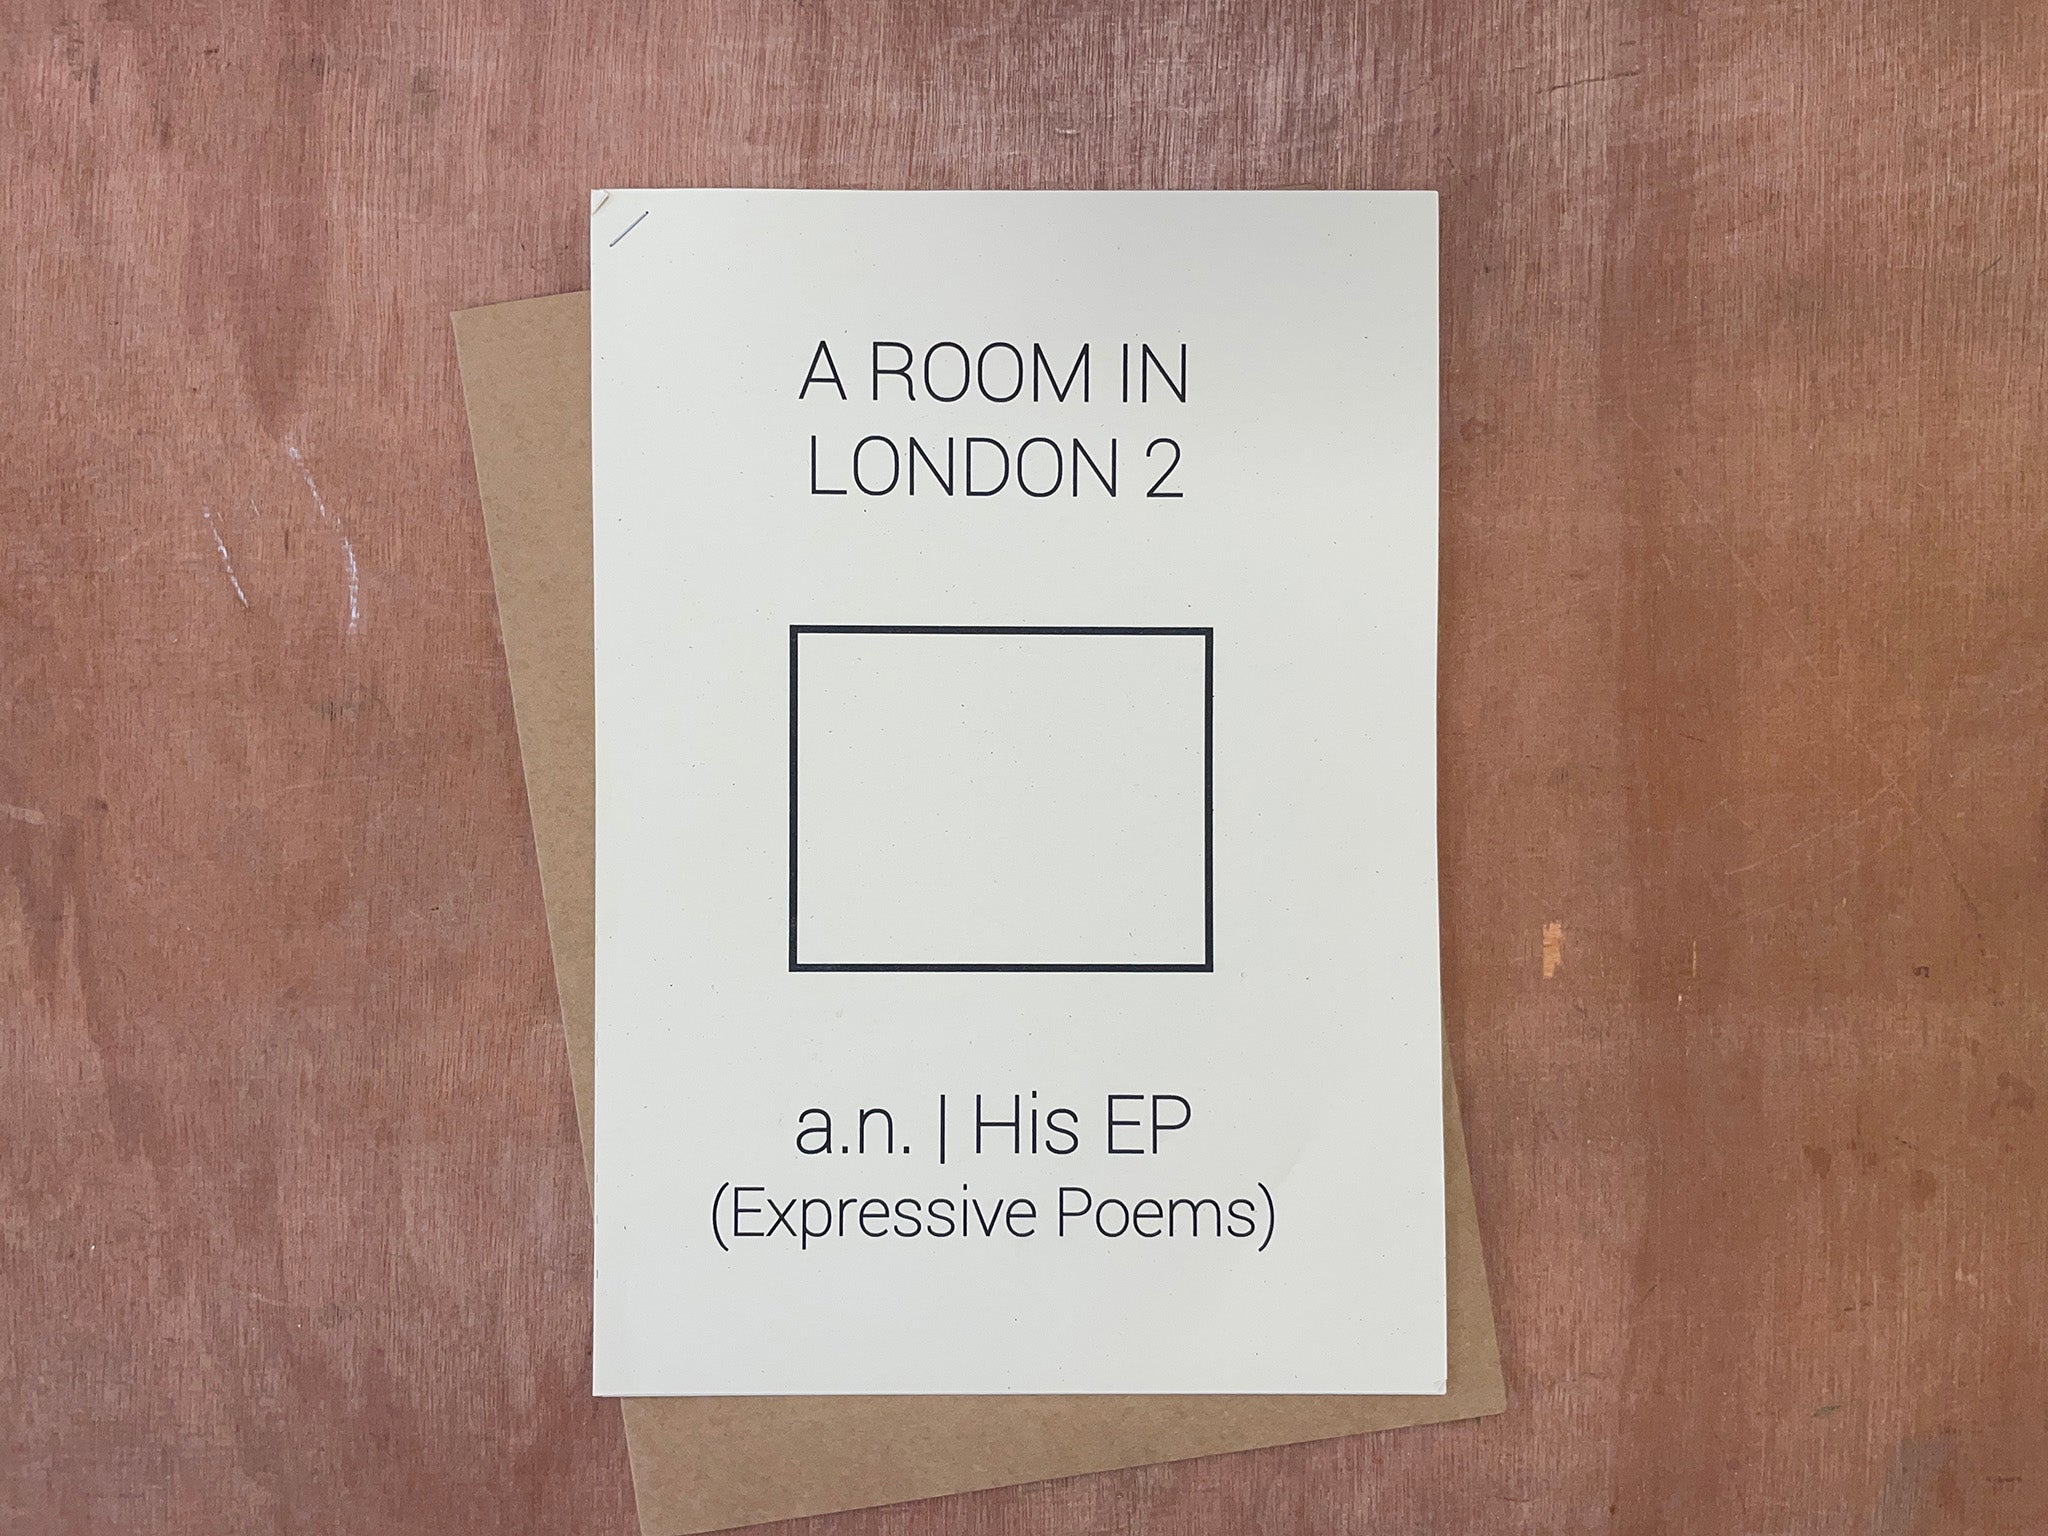 A ROOM IN LONDON 2 by Adios Nervosa